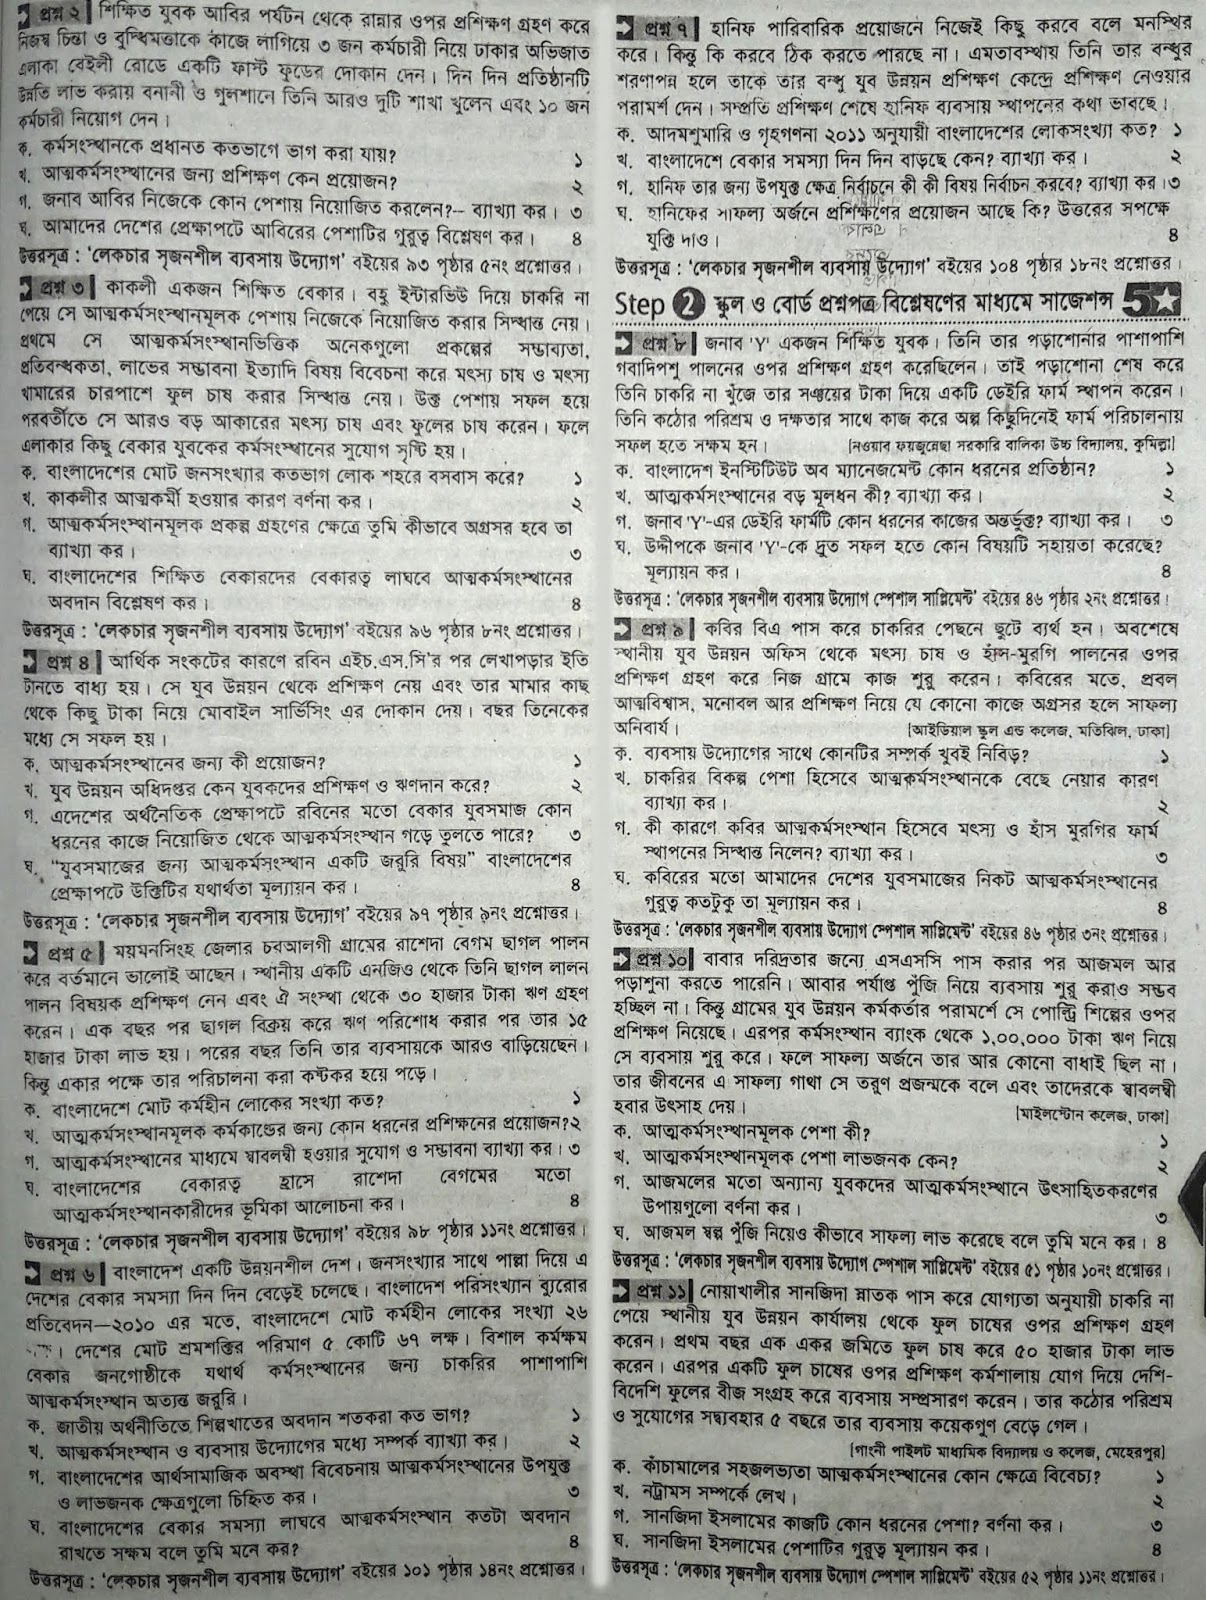 SSC Business Entrepreneurship suggestion, question paper, model question, mcq question, question pattern, syllabus for dhaka board, all boards